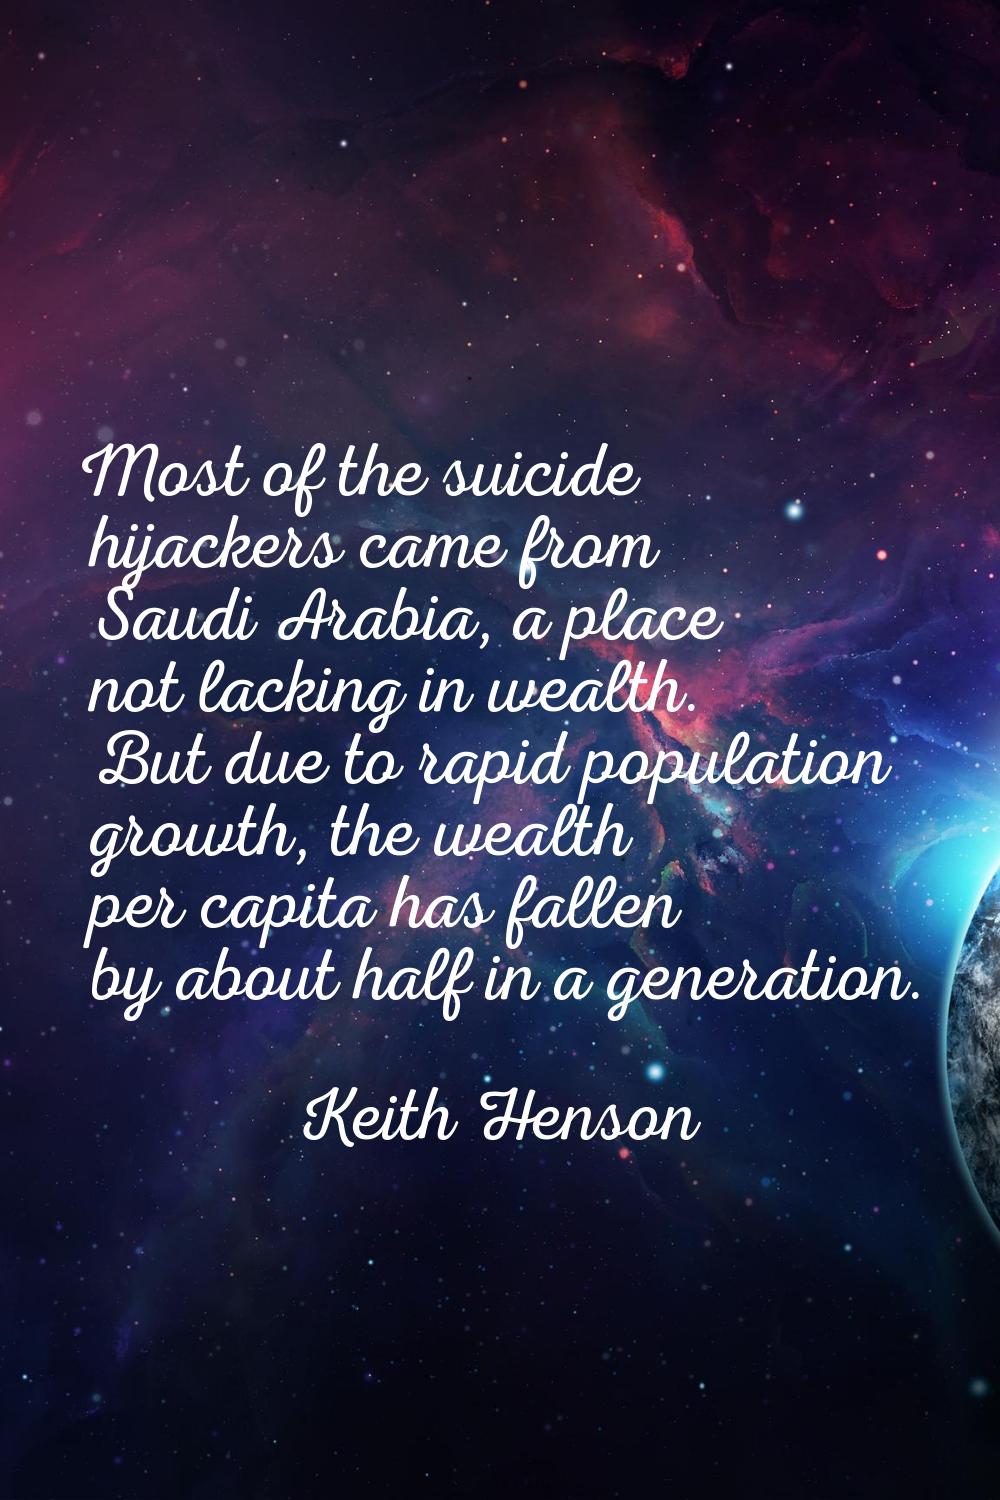 Most of the suicide hijackers came from Saudi Arabia, a place not lacking in wealth. But due to rap